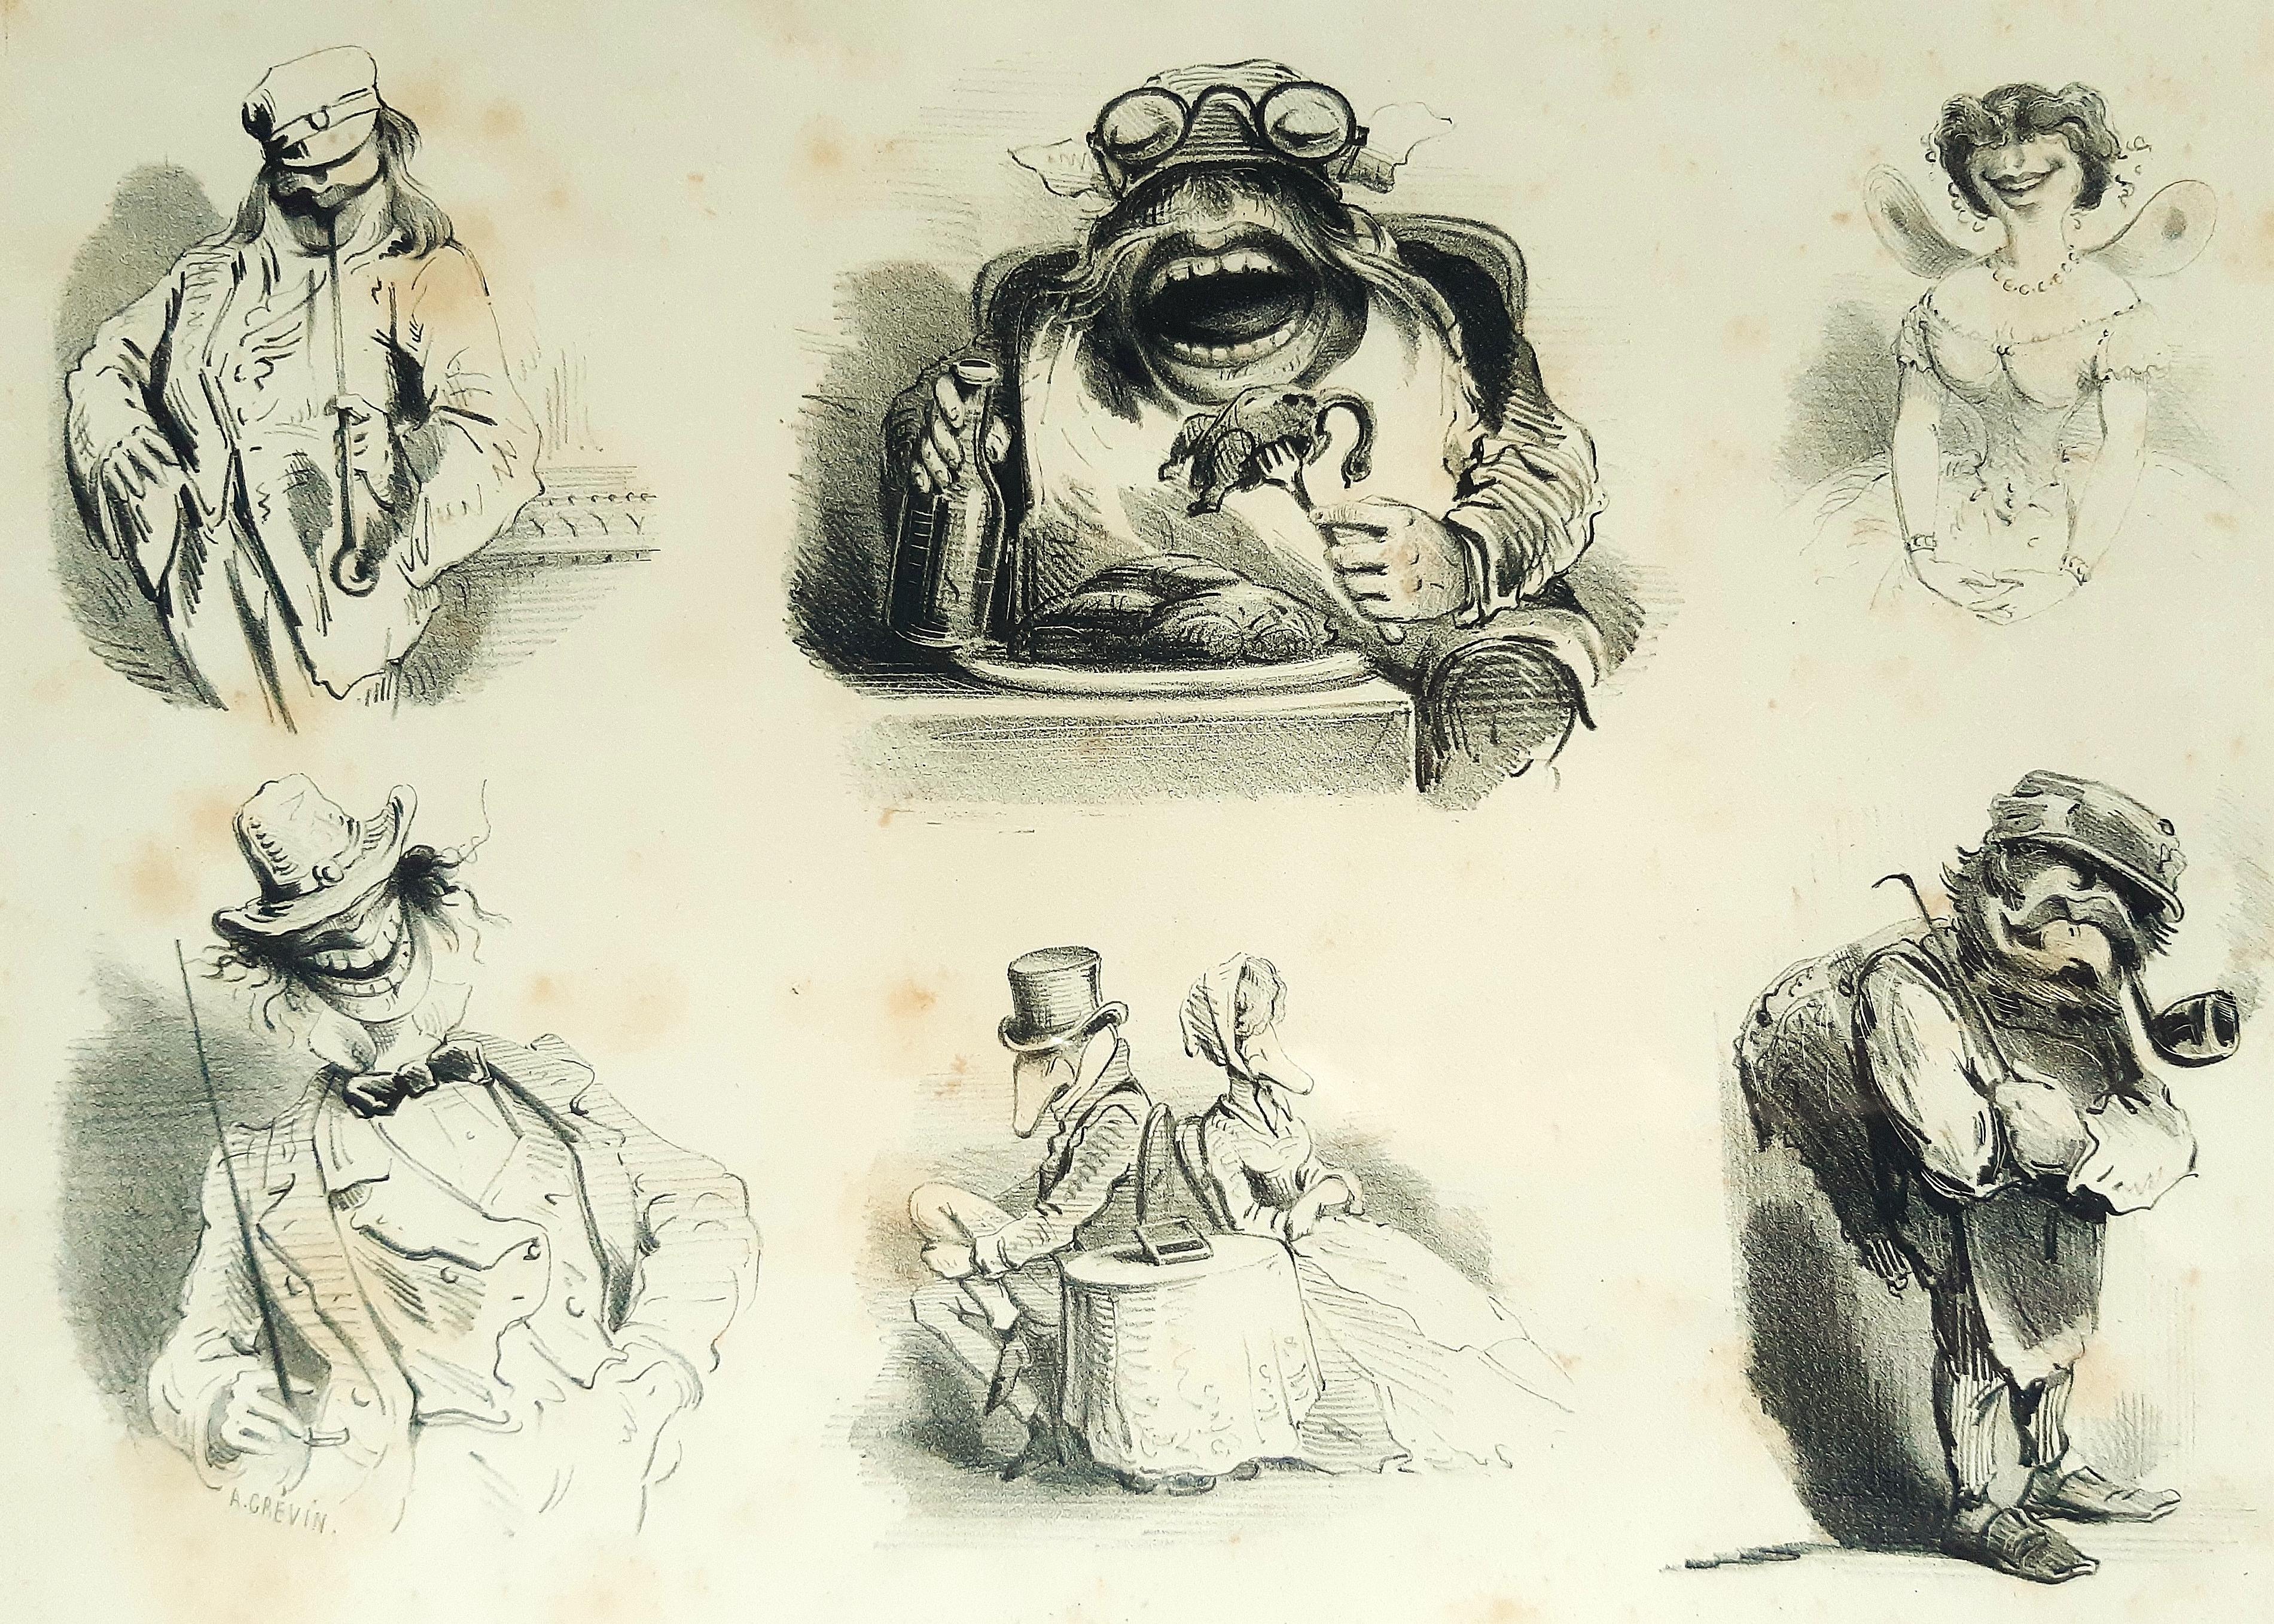 Alfred Grevin Figurative Print - Monorganorama - Suite of 5 Original Lithographs by A. Grevin - 1858